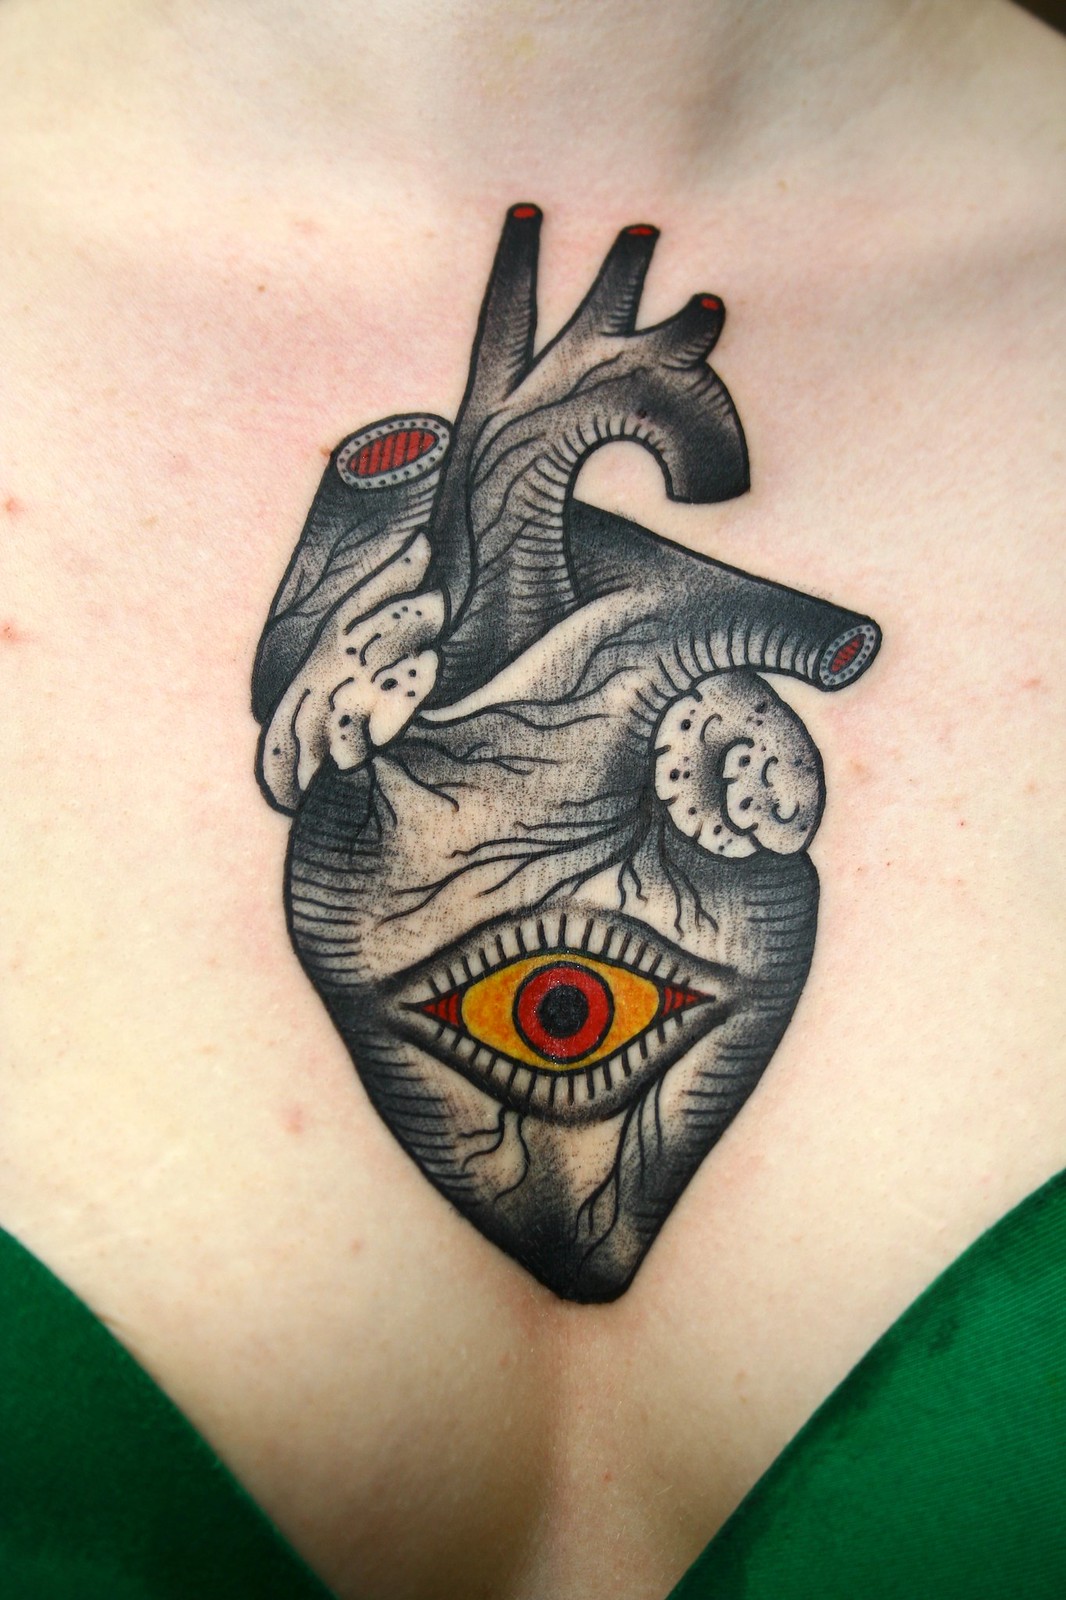 Traditional Anatomical Heart Tattoo